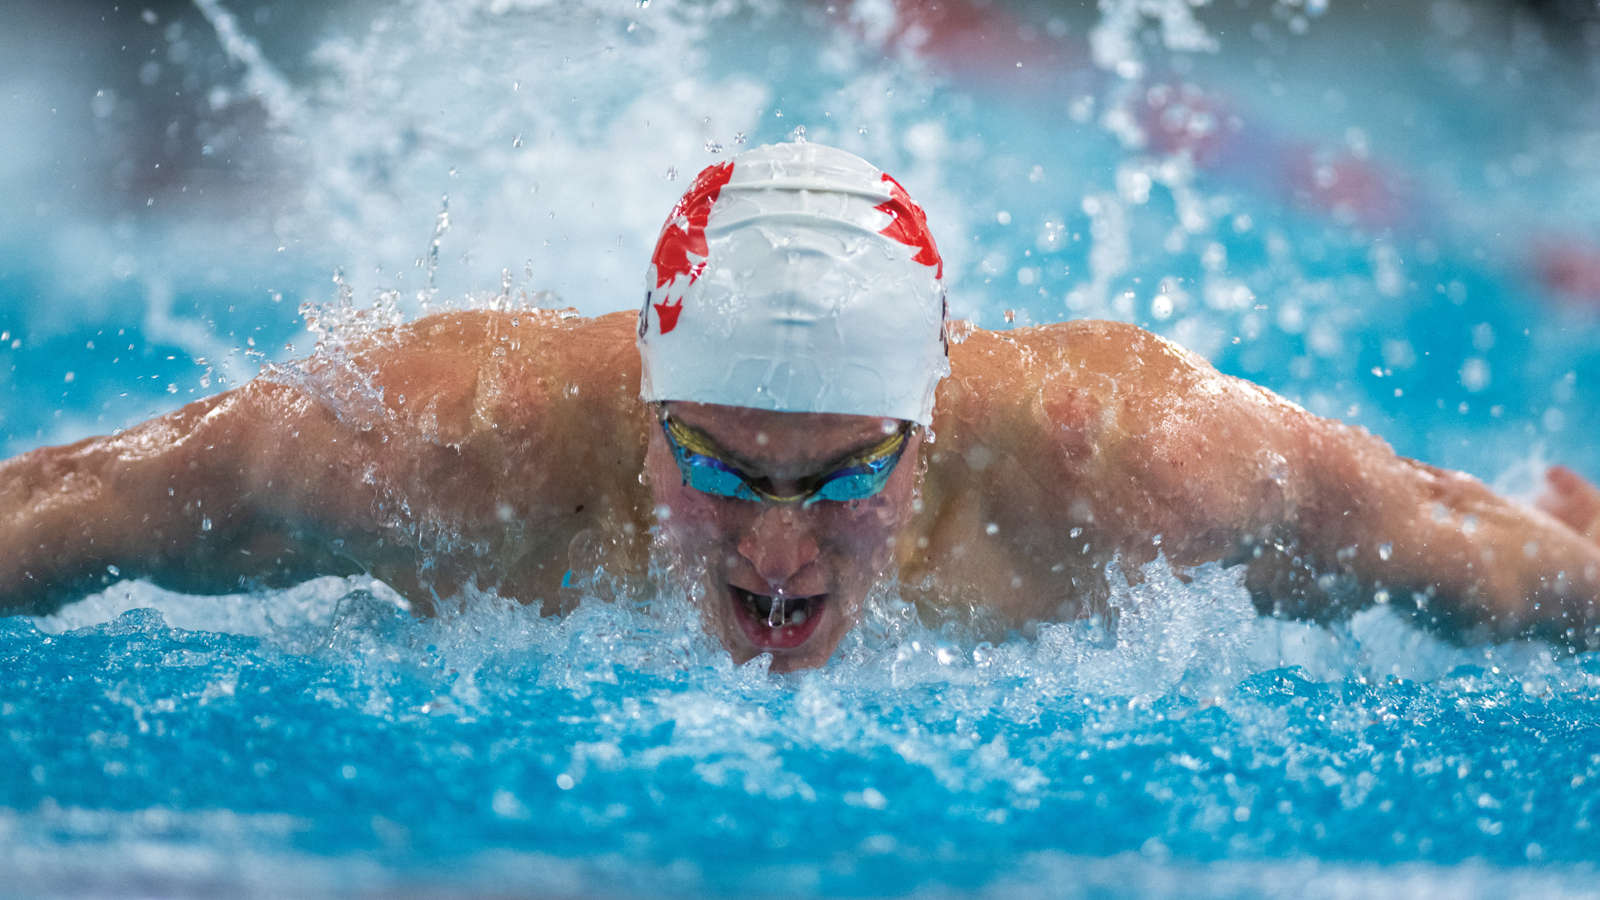 York men's swimmer Eric Ginzburg swimming the butterfly during a race